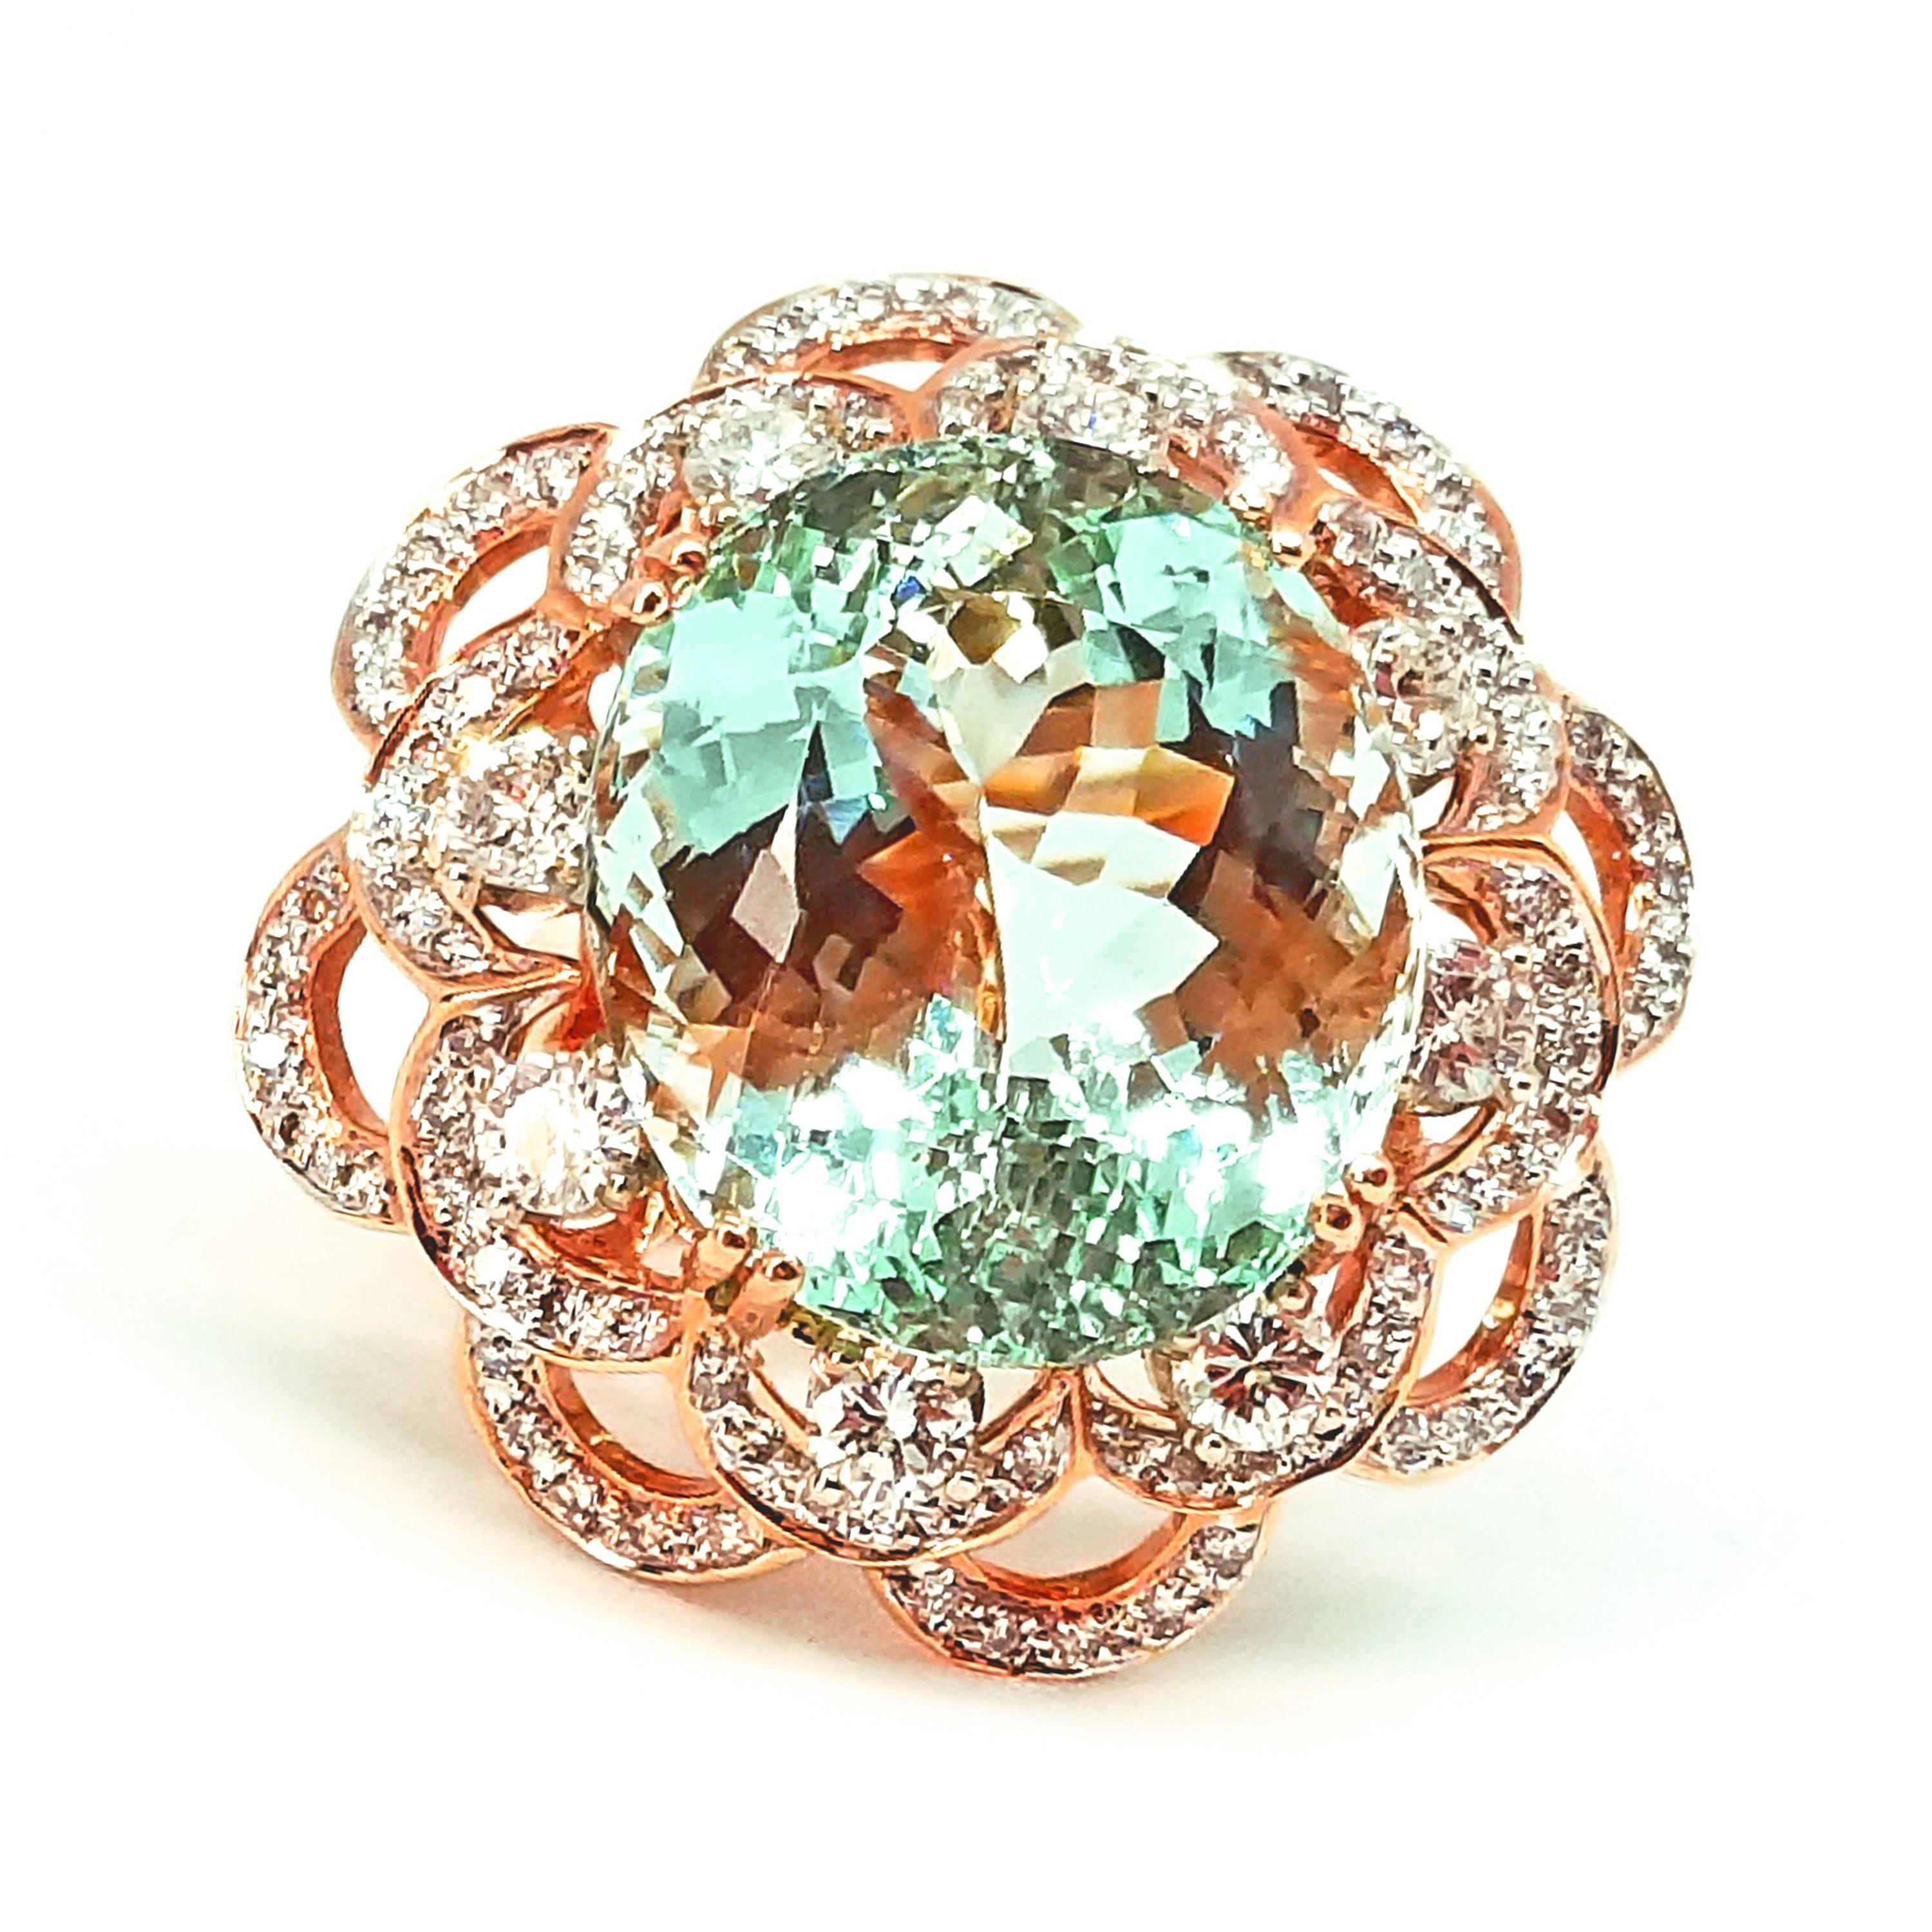 One of a Kind Statement Cocktail Ring featuring a 19.07 Carat Oval Brazilian Aquamarine of Gem Quality is Brilliantly faceted and sits above a Multi-tiered, Diamond setting of Highly Polished, 18K Rose Gold. The Diamonds in the setting are Round